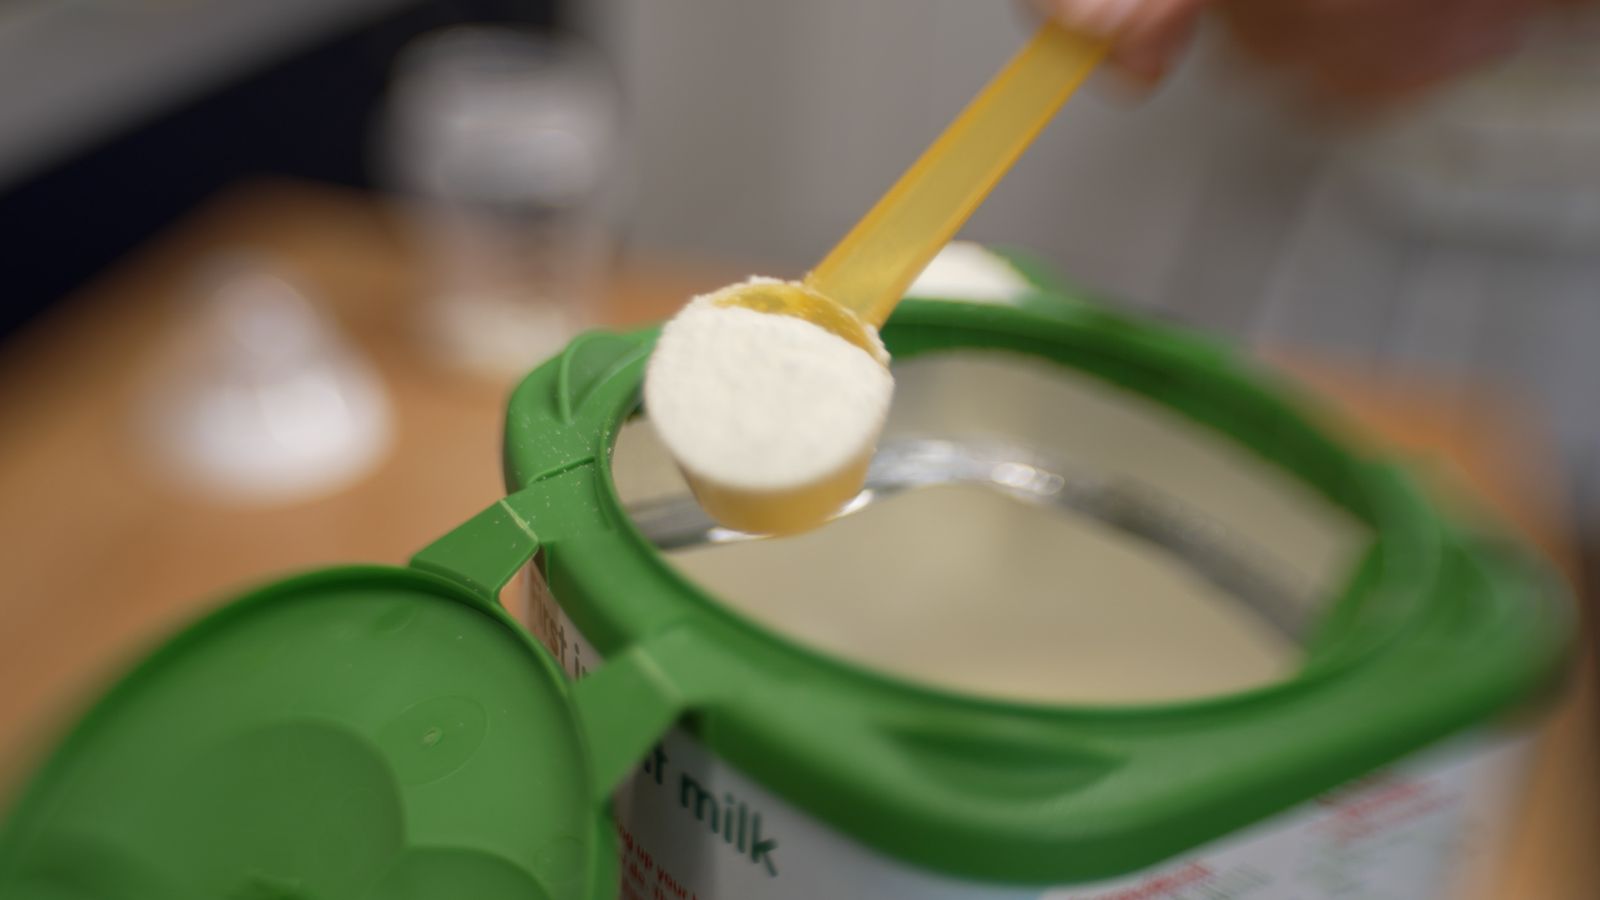 Baby formula prices a 'catastrophe' for families that 'cannot be ignored', MP says